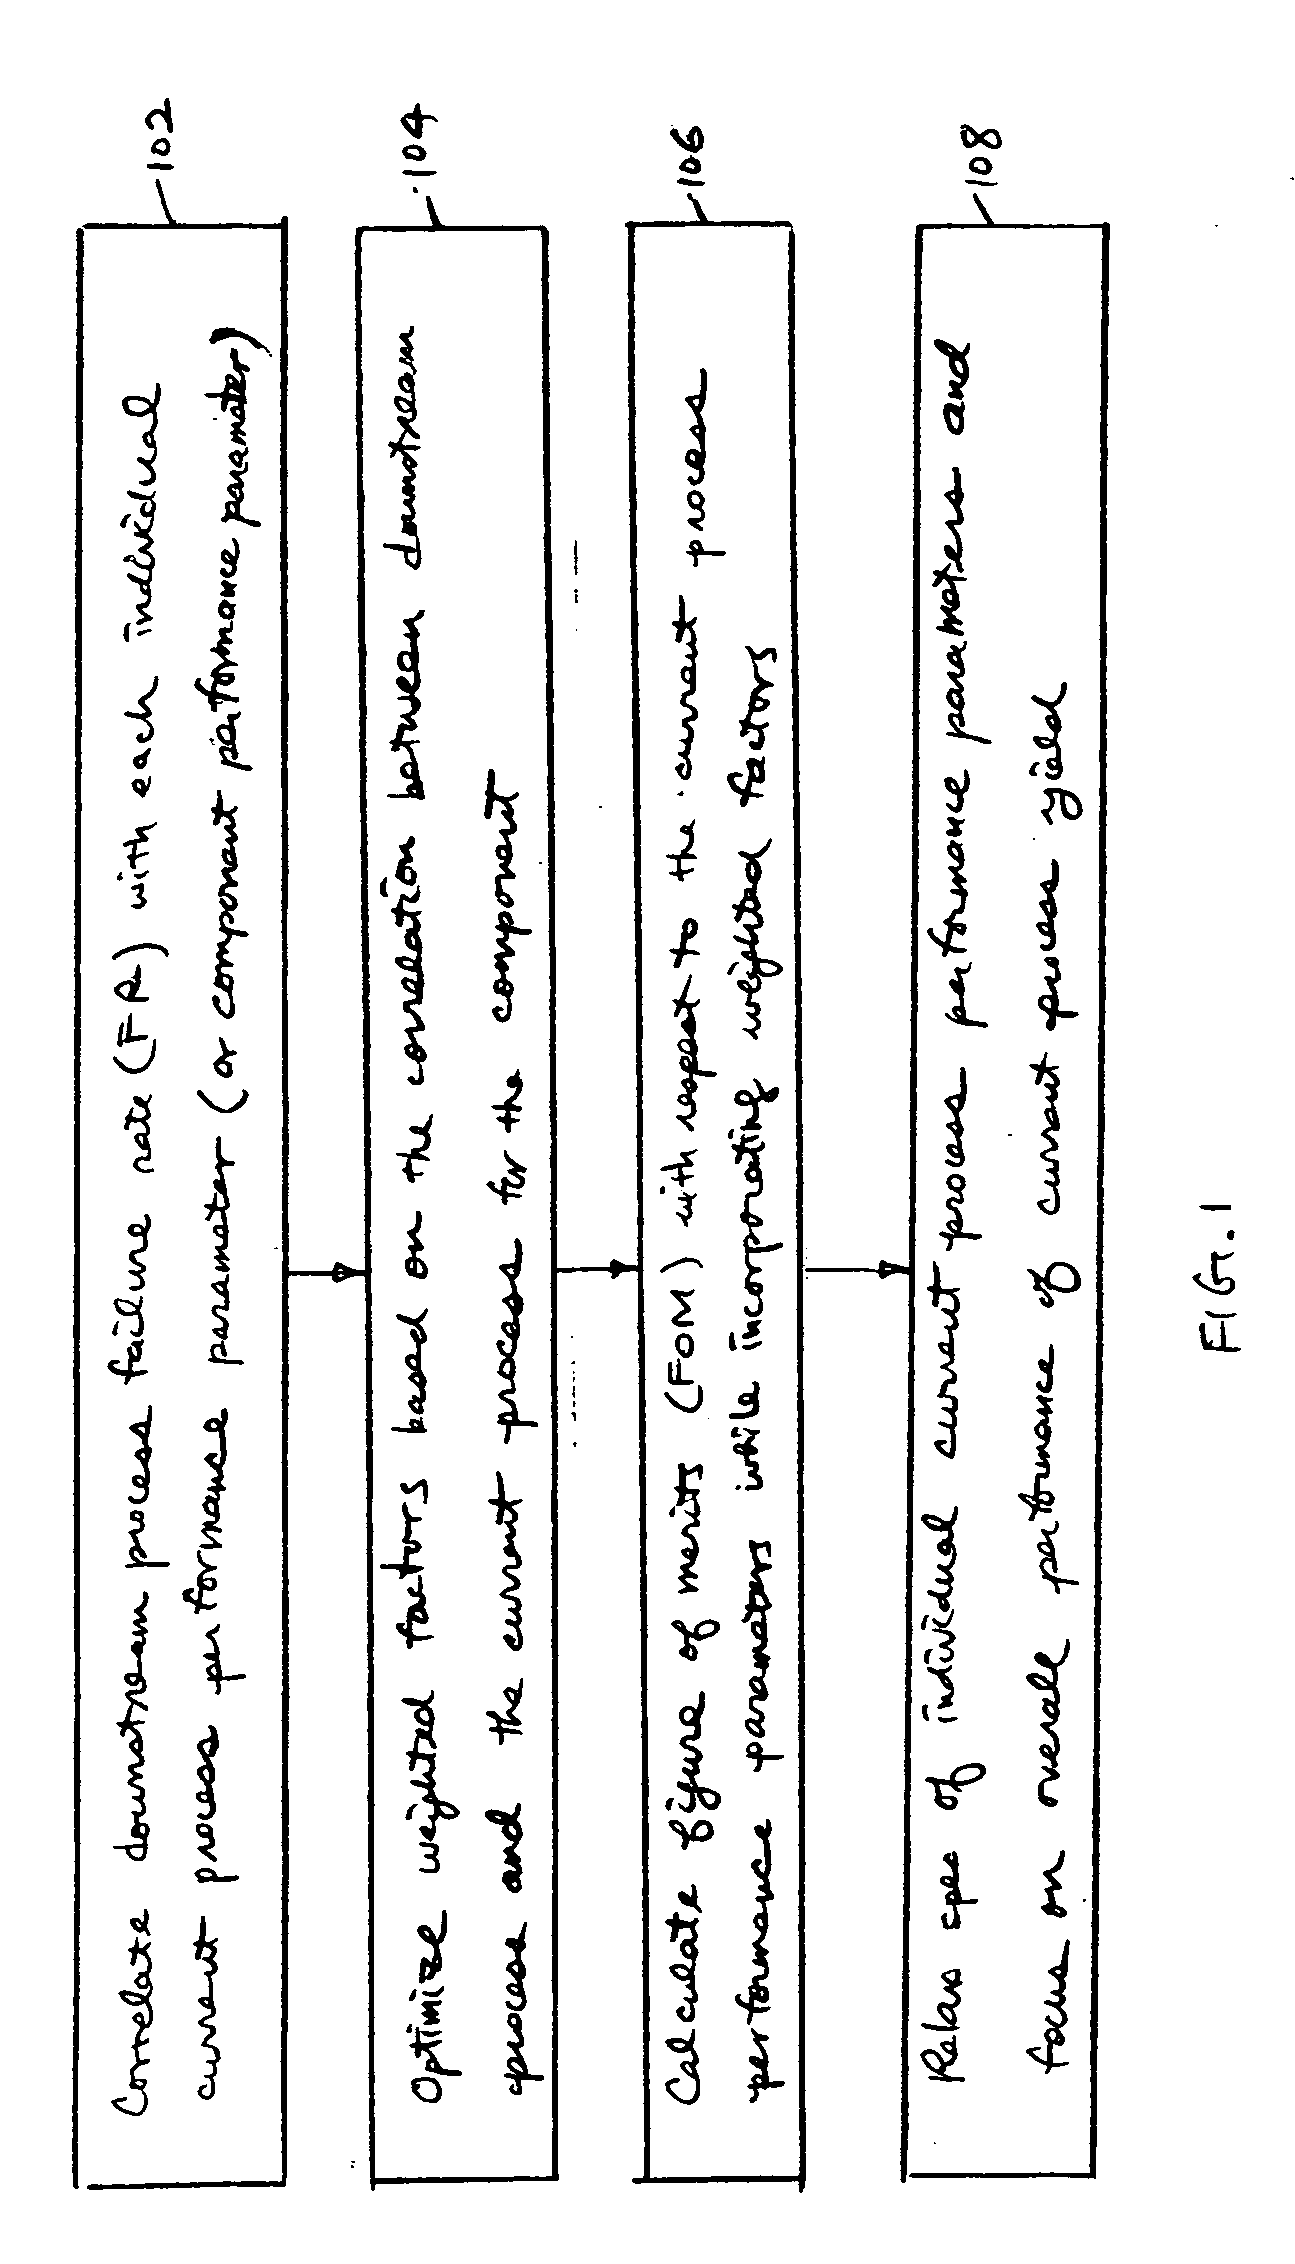 Method of weighted combination specs for enhanced manufacturing yield